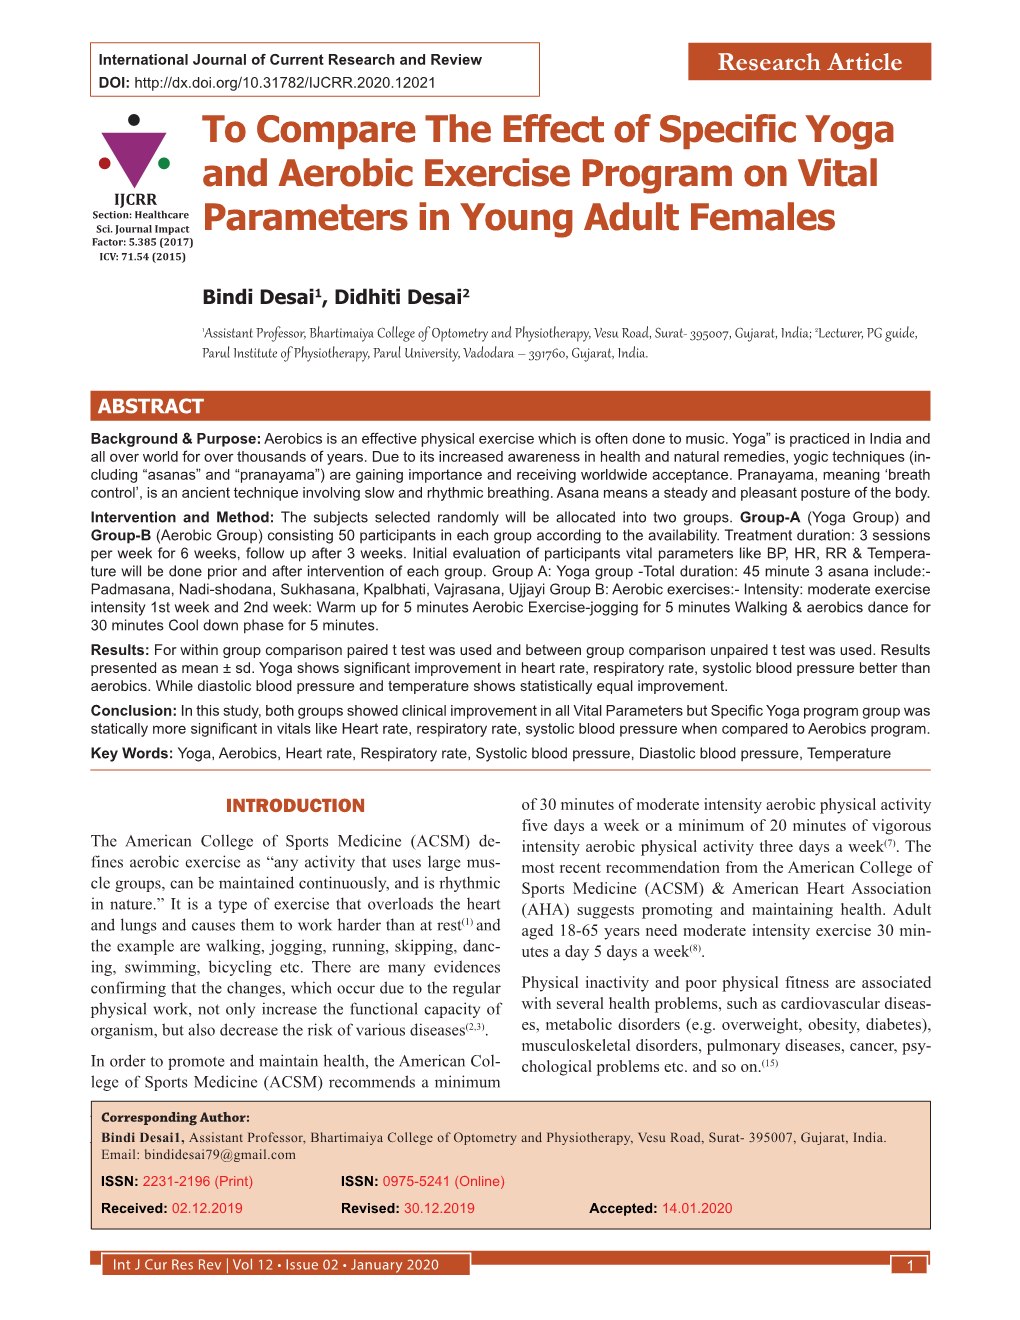 To Compare the Effect of Specific Yoga and Aerobic Exercise Program on Vital Parameters in Young Adult Females